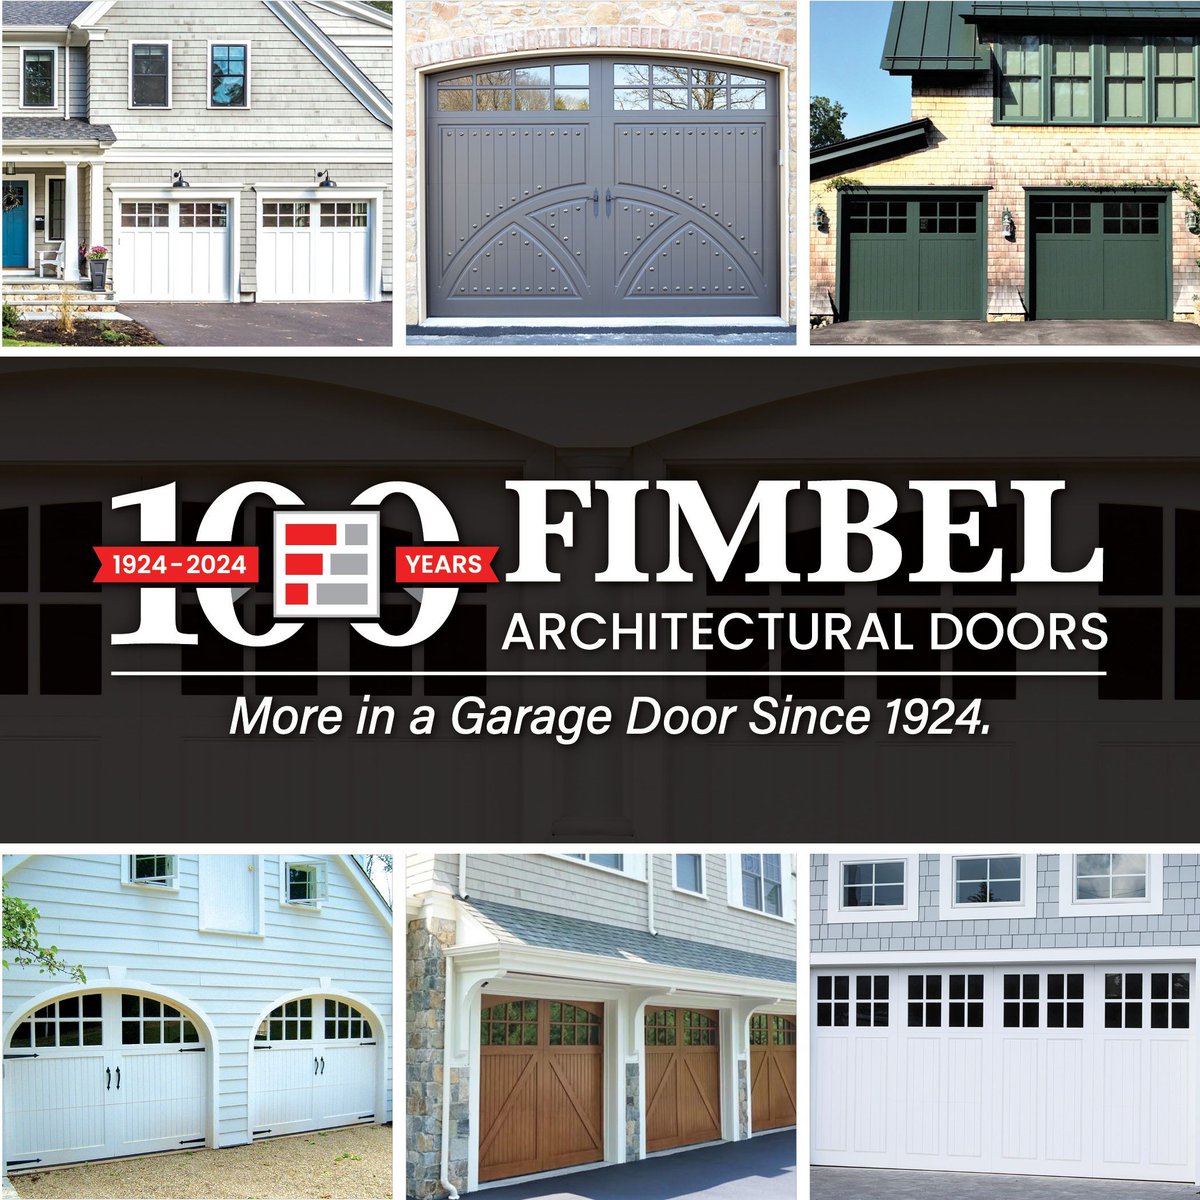 Fimbel ADS is celebrating 100 years of More in a Garage Door.

Read more about the Fimbel ADS story here: buff.ly/3HbHOhT
And check out our amazing garage doors here: buff.ly/3fpQ2Fi

#FimbelADS100 #100years #moreinagaragedoor #familyproud #centennialcelebration